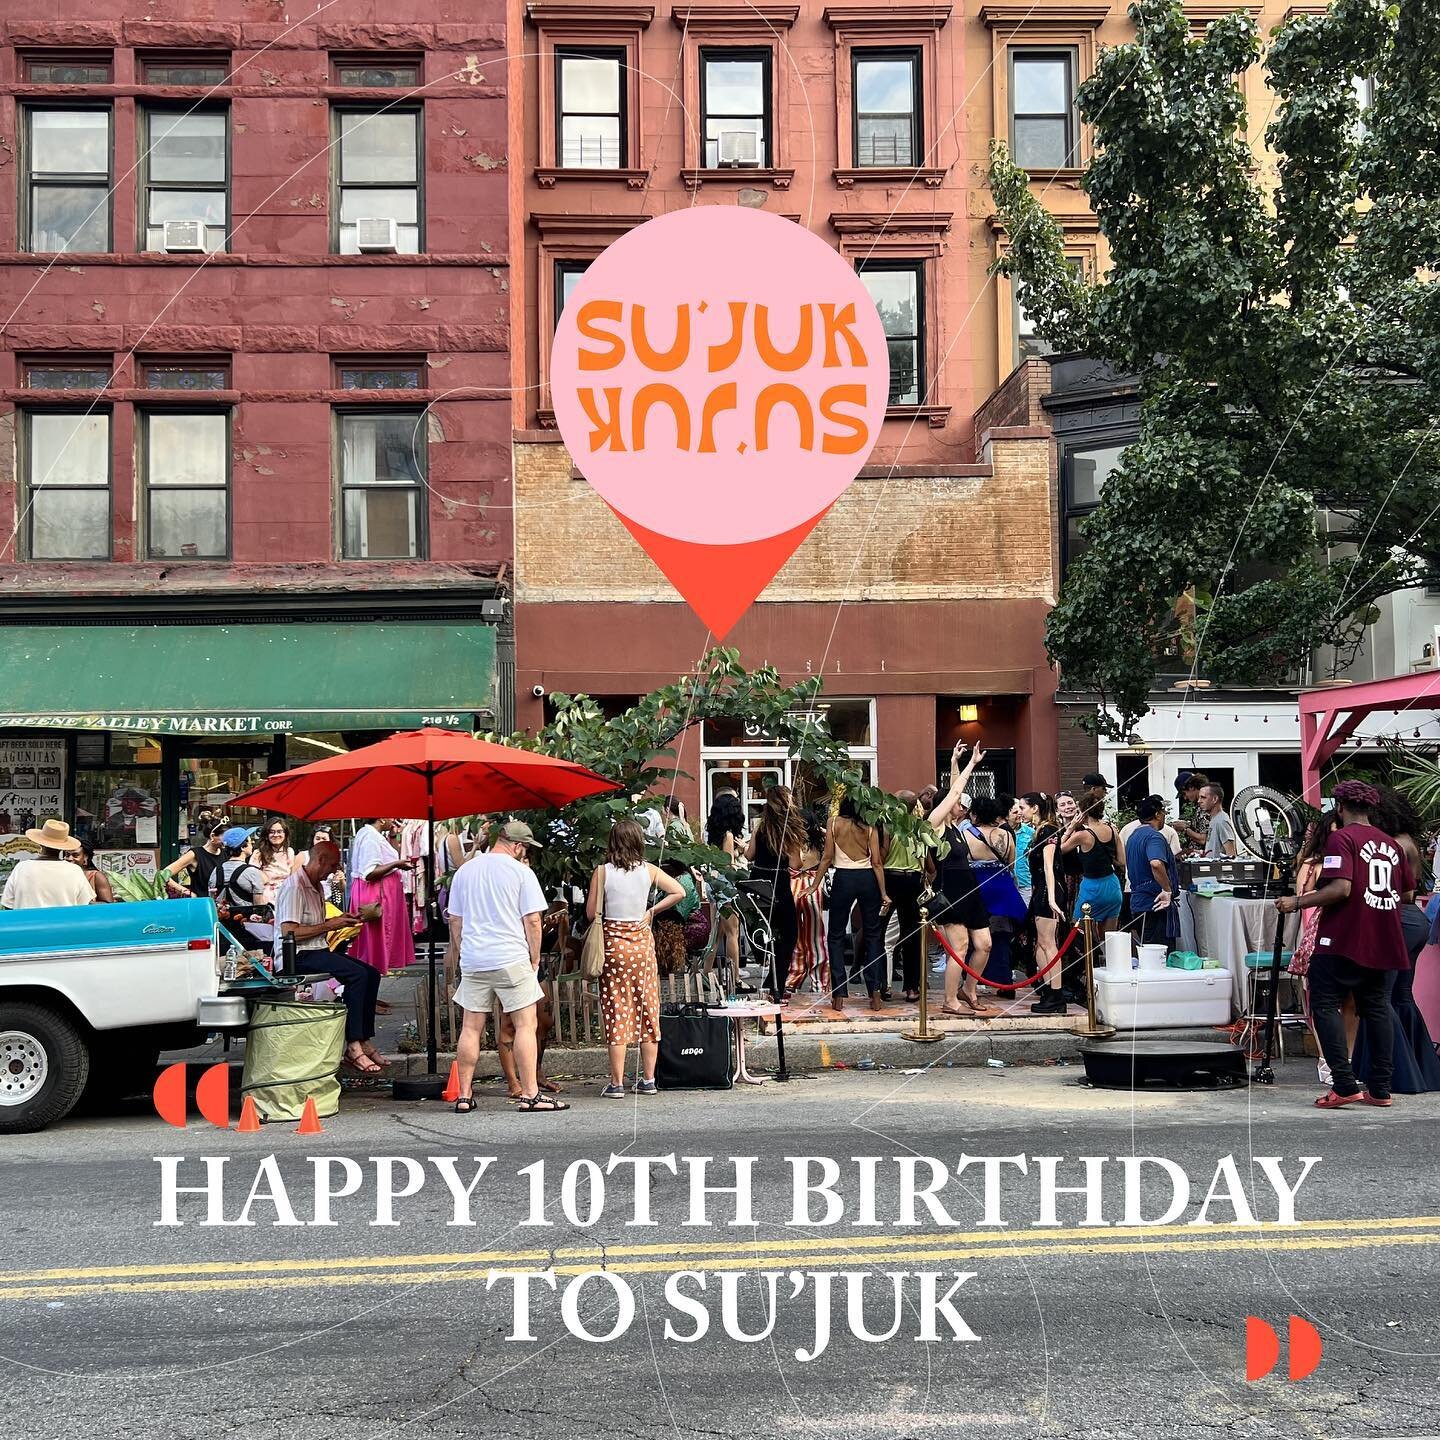 Haven&rsquo;t you heard? Su&rsquo;juk turned 10! 🎂 🎉 

For a little over a decade now, Su&rsquo;juk has resided in the heart of Clinton Hill on Greene and Grand Ave giving vintage lifestyle a whole new name! From furniture to unique knick knacks, f